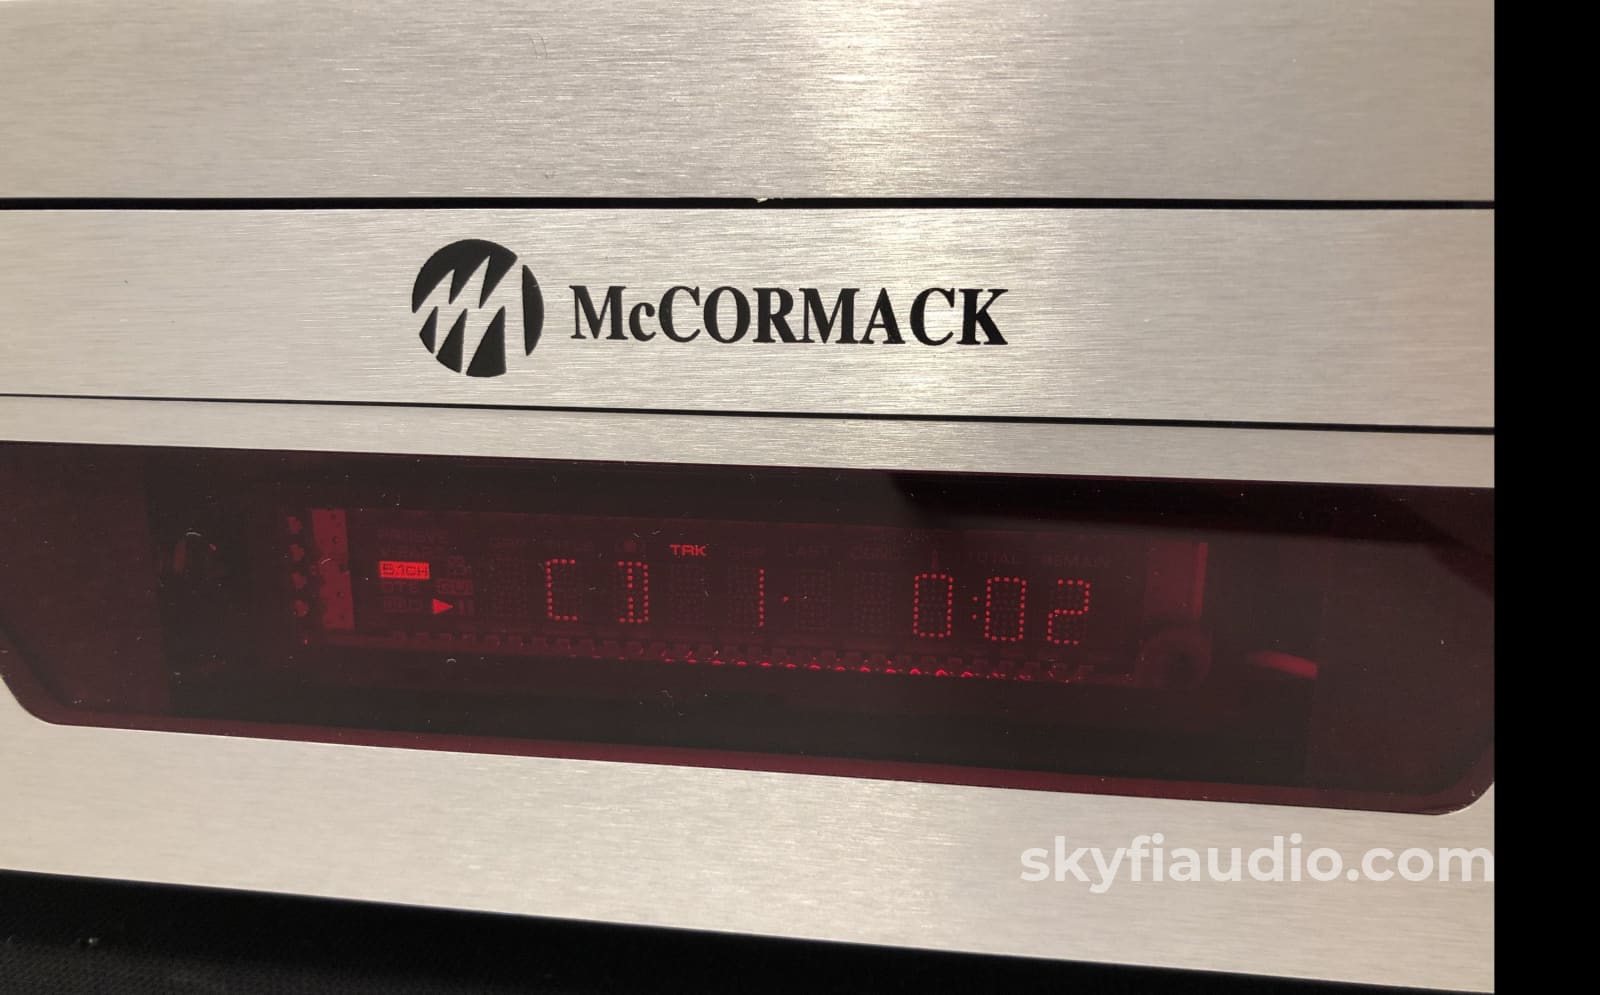 Mccormack Udp-1 Sacd/Cd Player - Burr-Brown Dacs Complete With Remote Box And Manual Cd + Digital